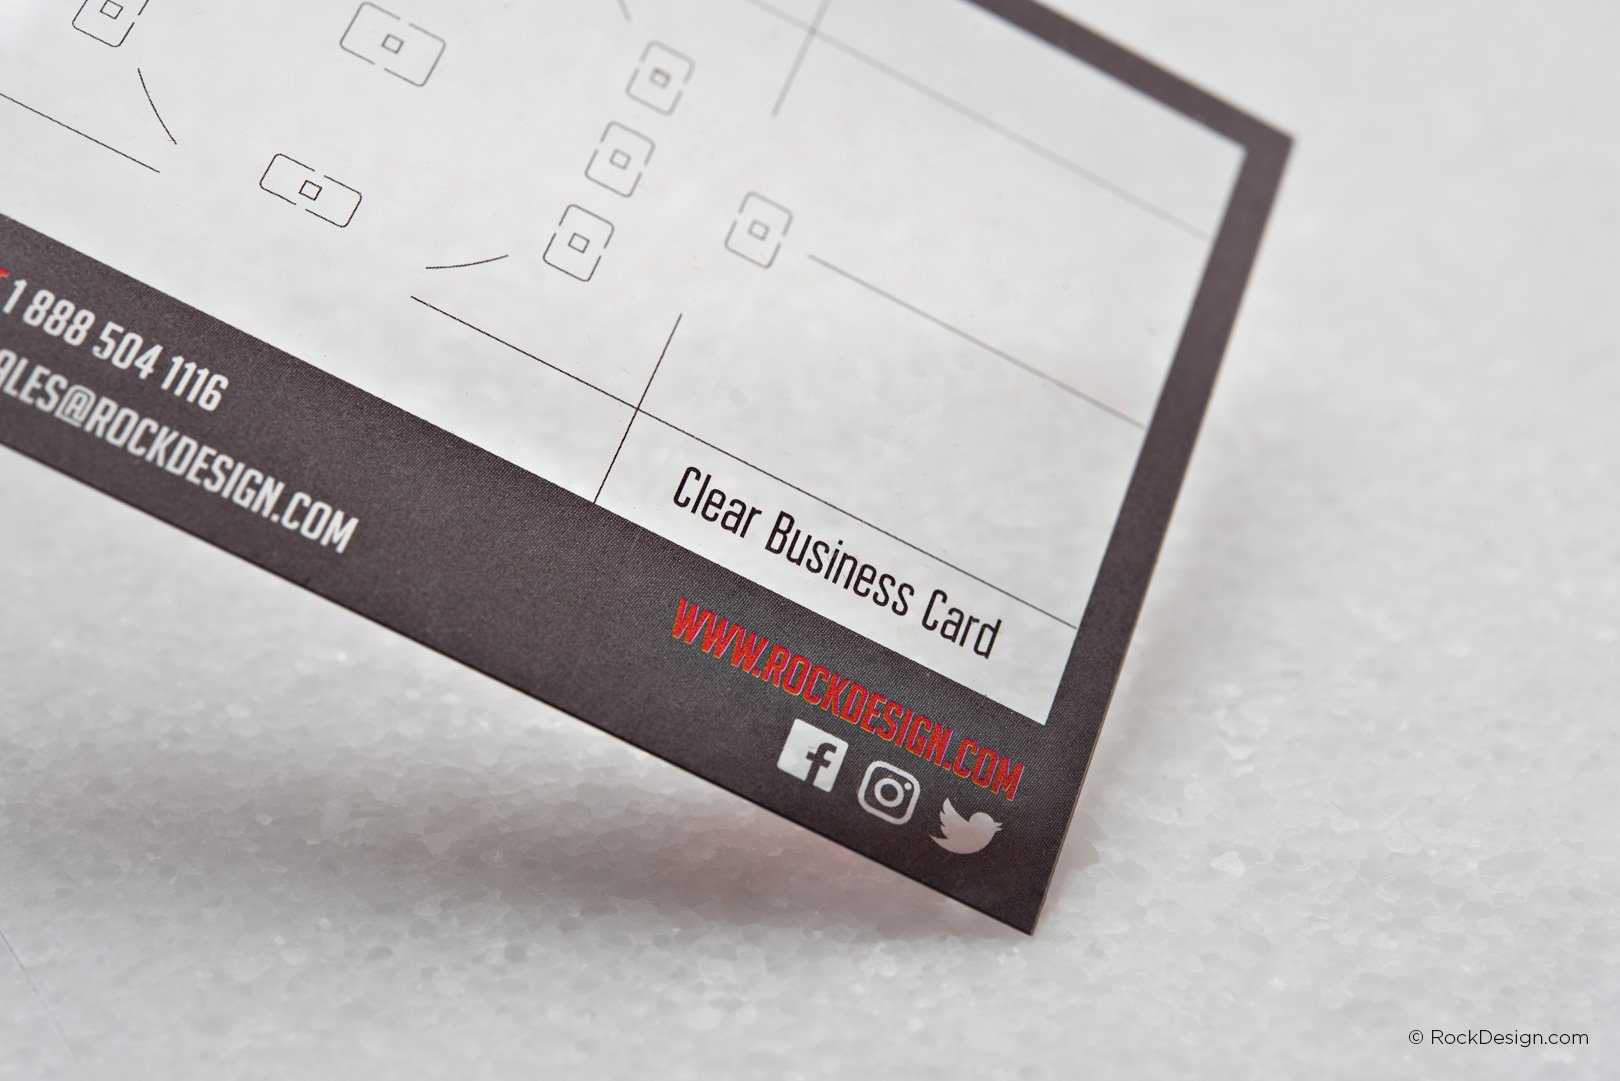 Plastic Card Template With Print Service | Rockdesign Inside Transparent Business Cards Template